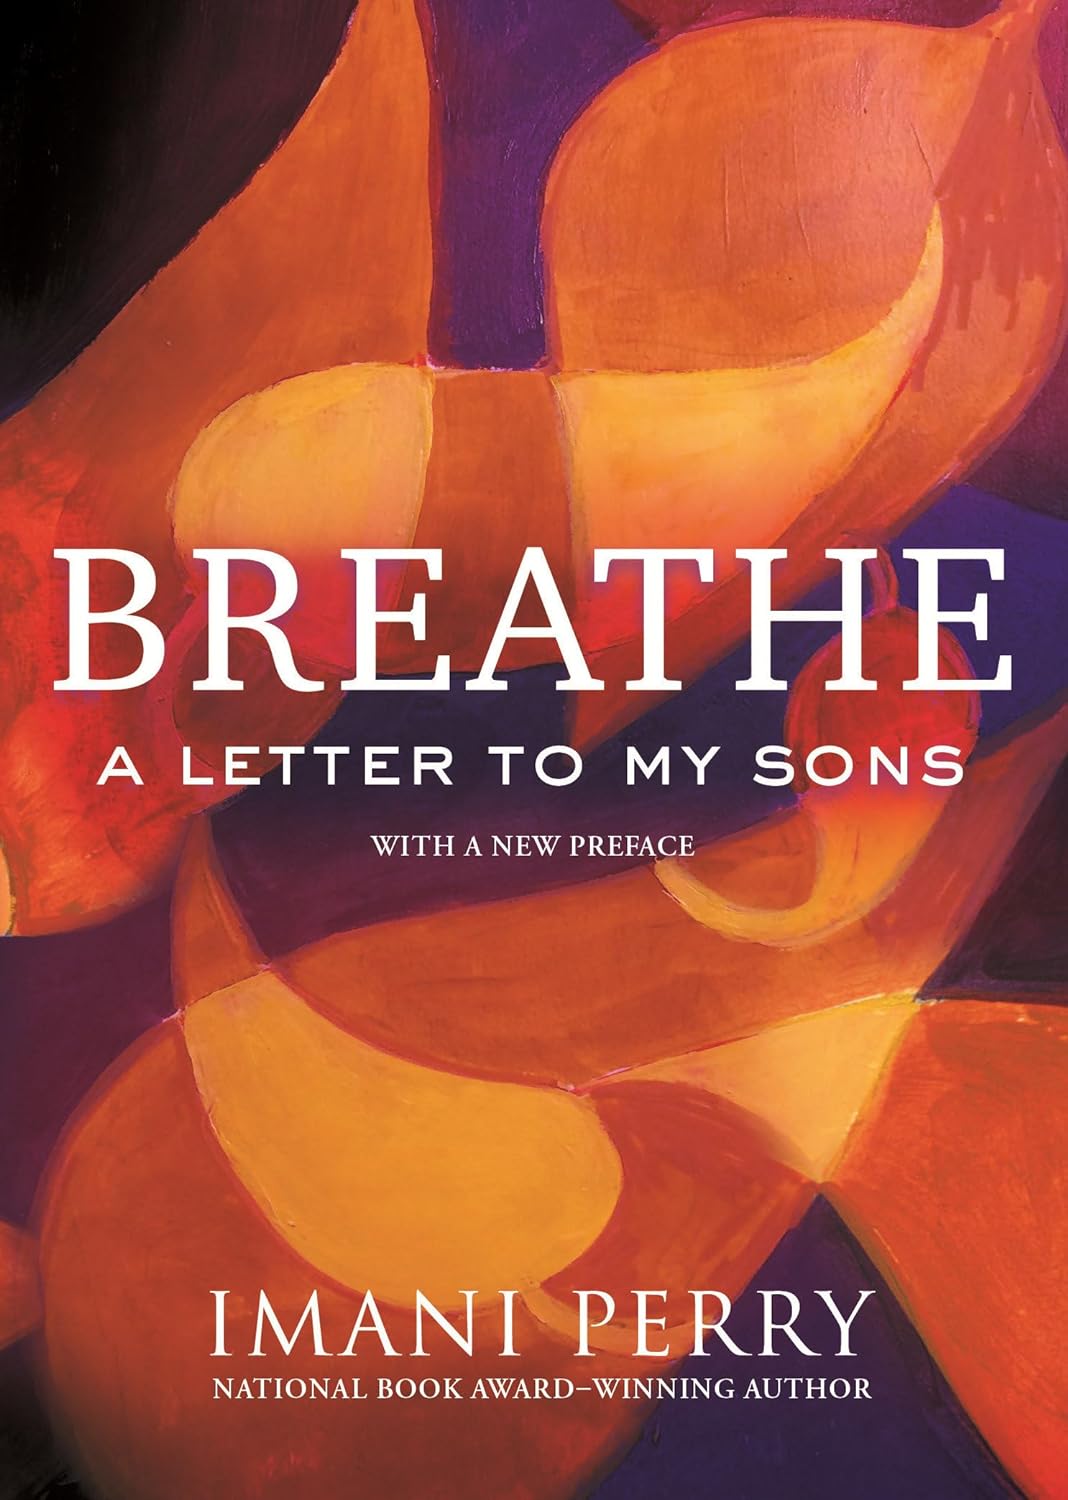 Breathe // A Letter to My Sons